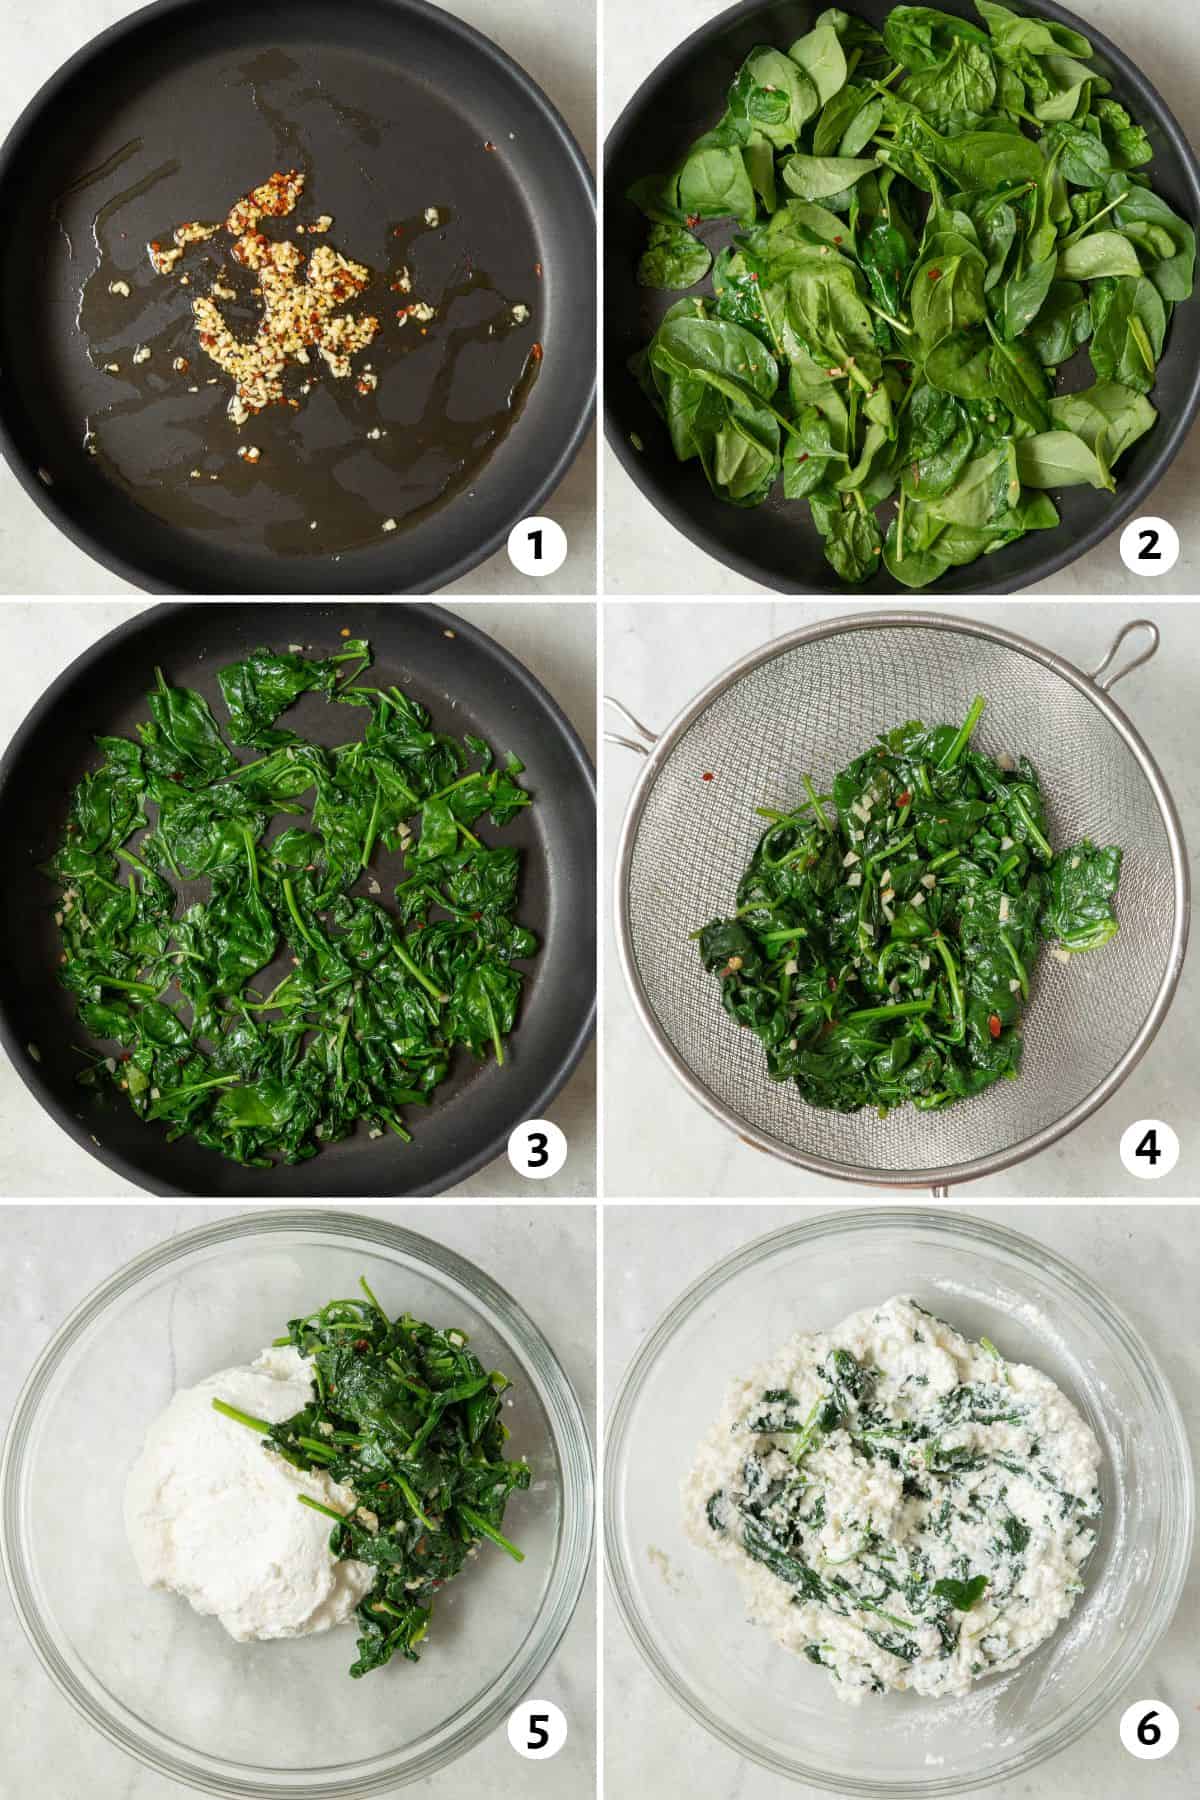 6 image collage making recipe: 1- garlic, oil, and red pepper flakes browned in a skillet, 2- fresh spinach added to the same pan, 3- spinach after wilting, 4- mixture in a colander, 5- spinach in a bowl with ricotta, 6- spinach and cheese combined.